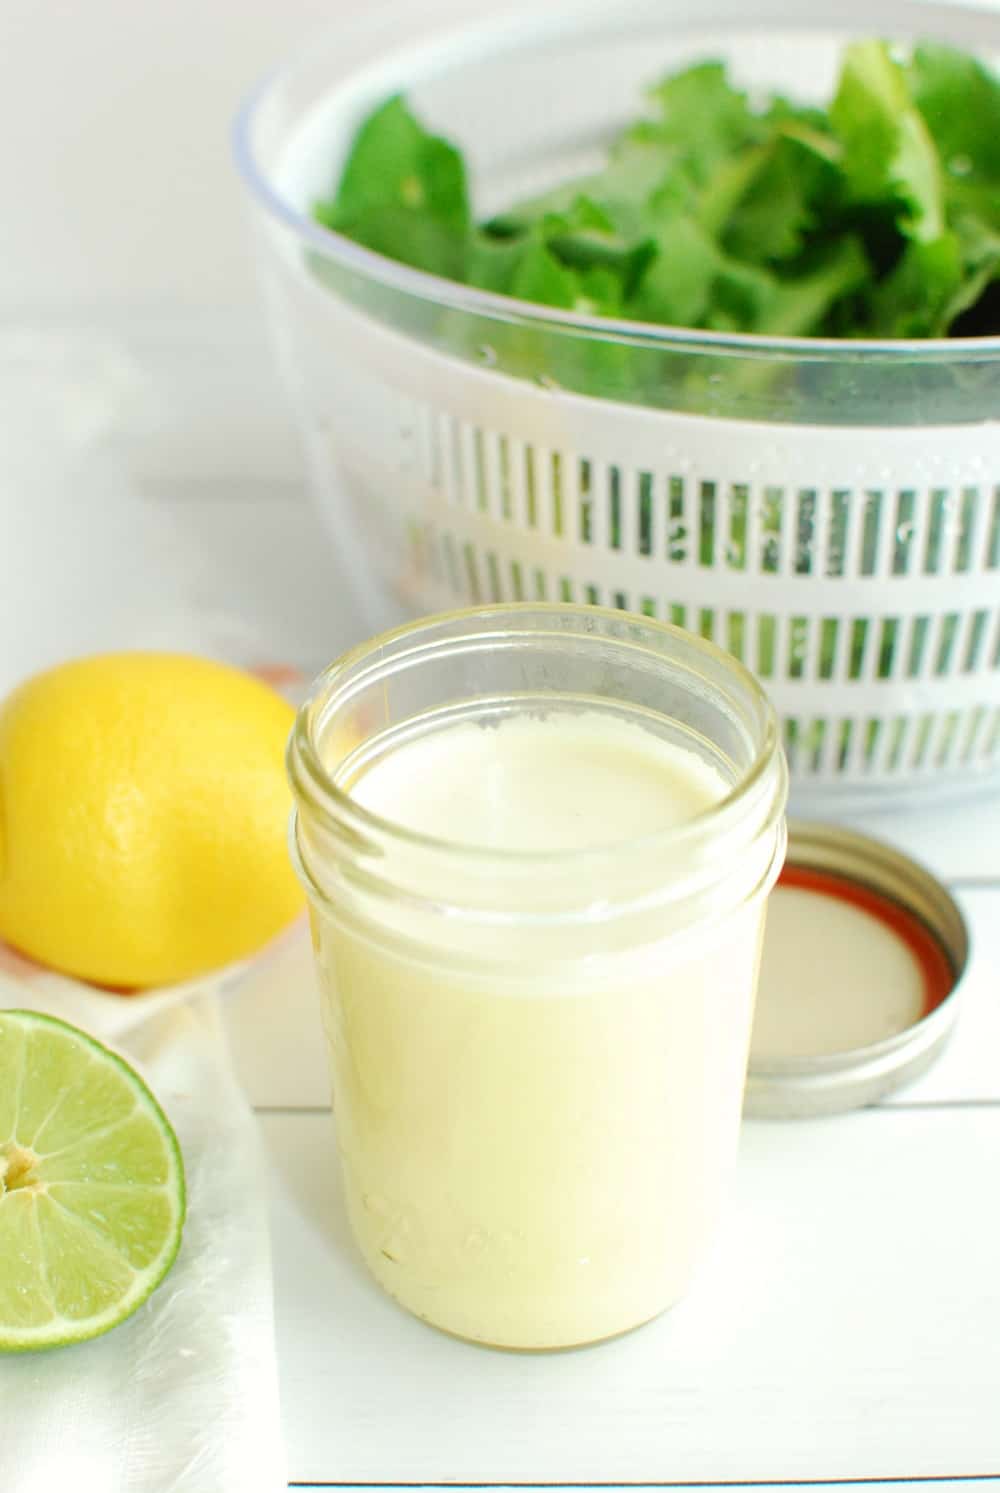 A jar of citrus salad dressing next to a lemon and a bowl of lettuce.